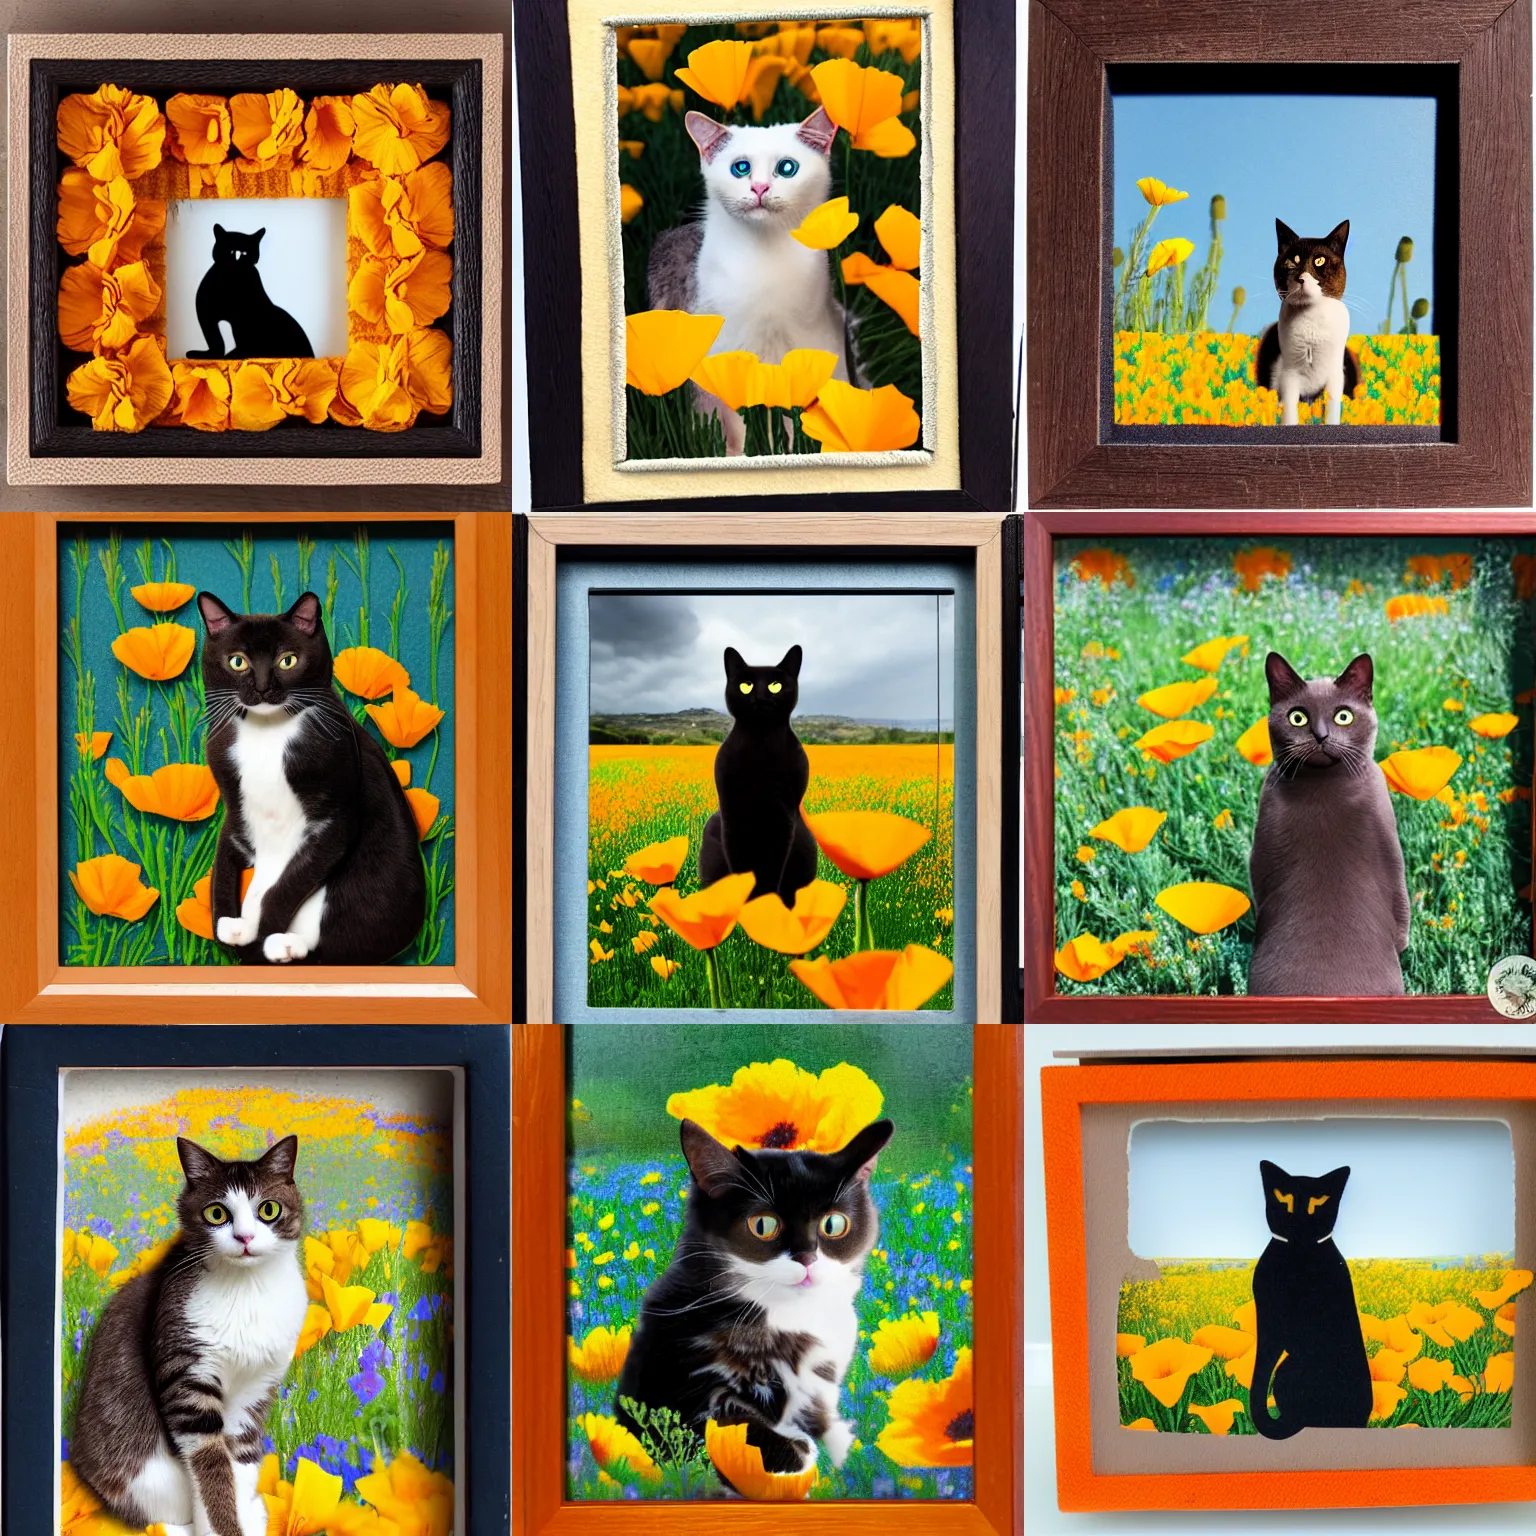 Prompt: shadowbox image of a cat sitting in california poppies field